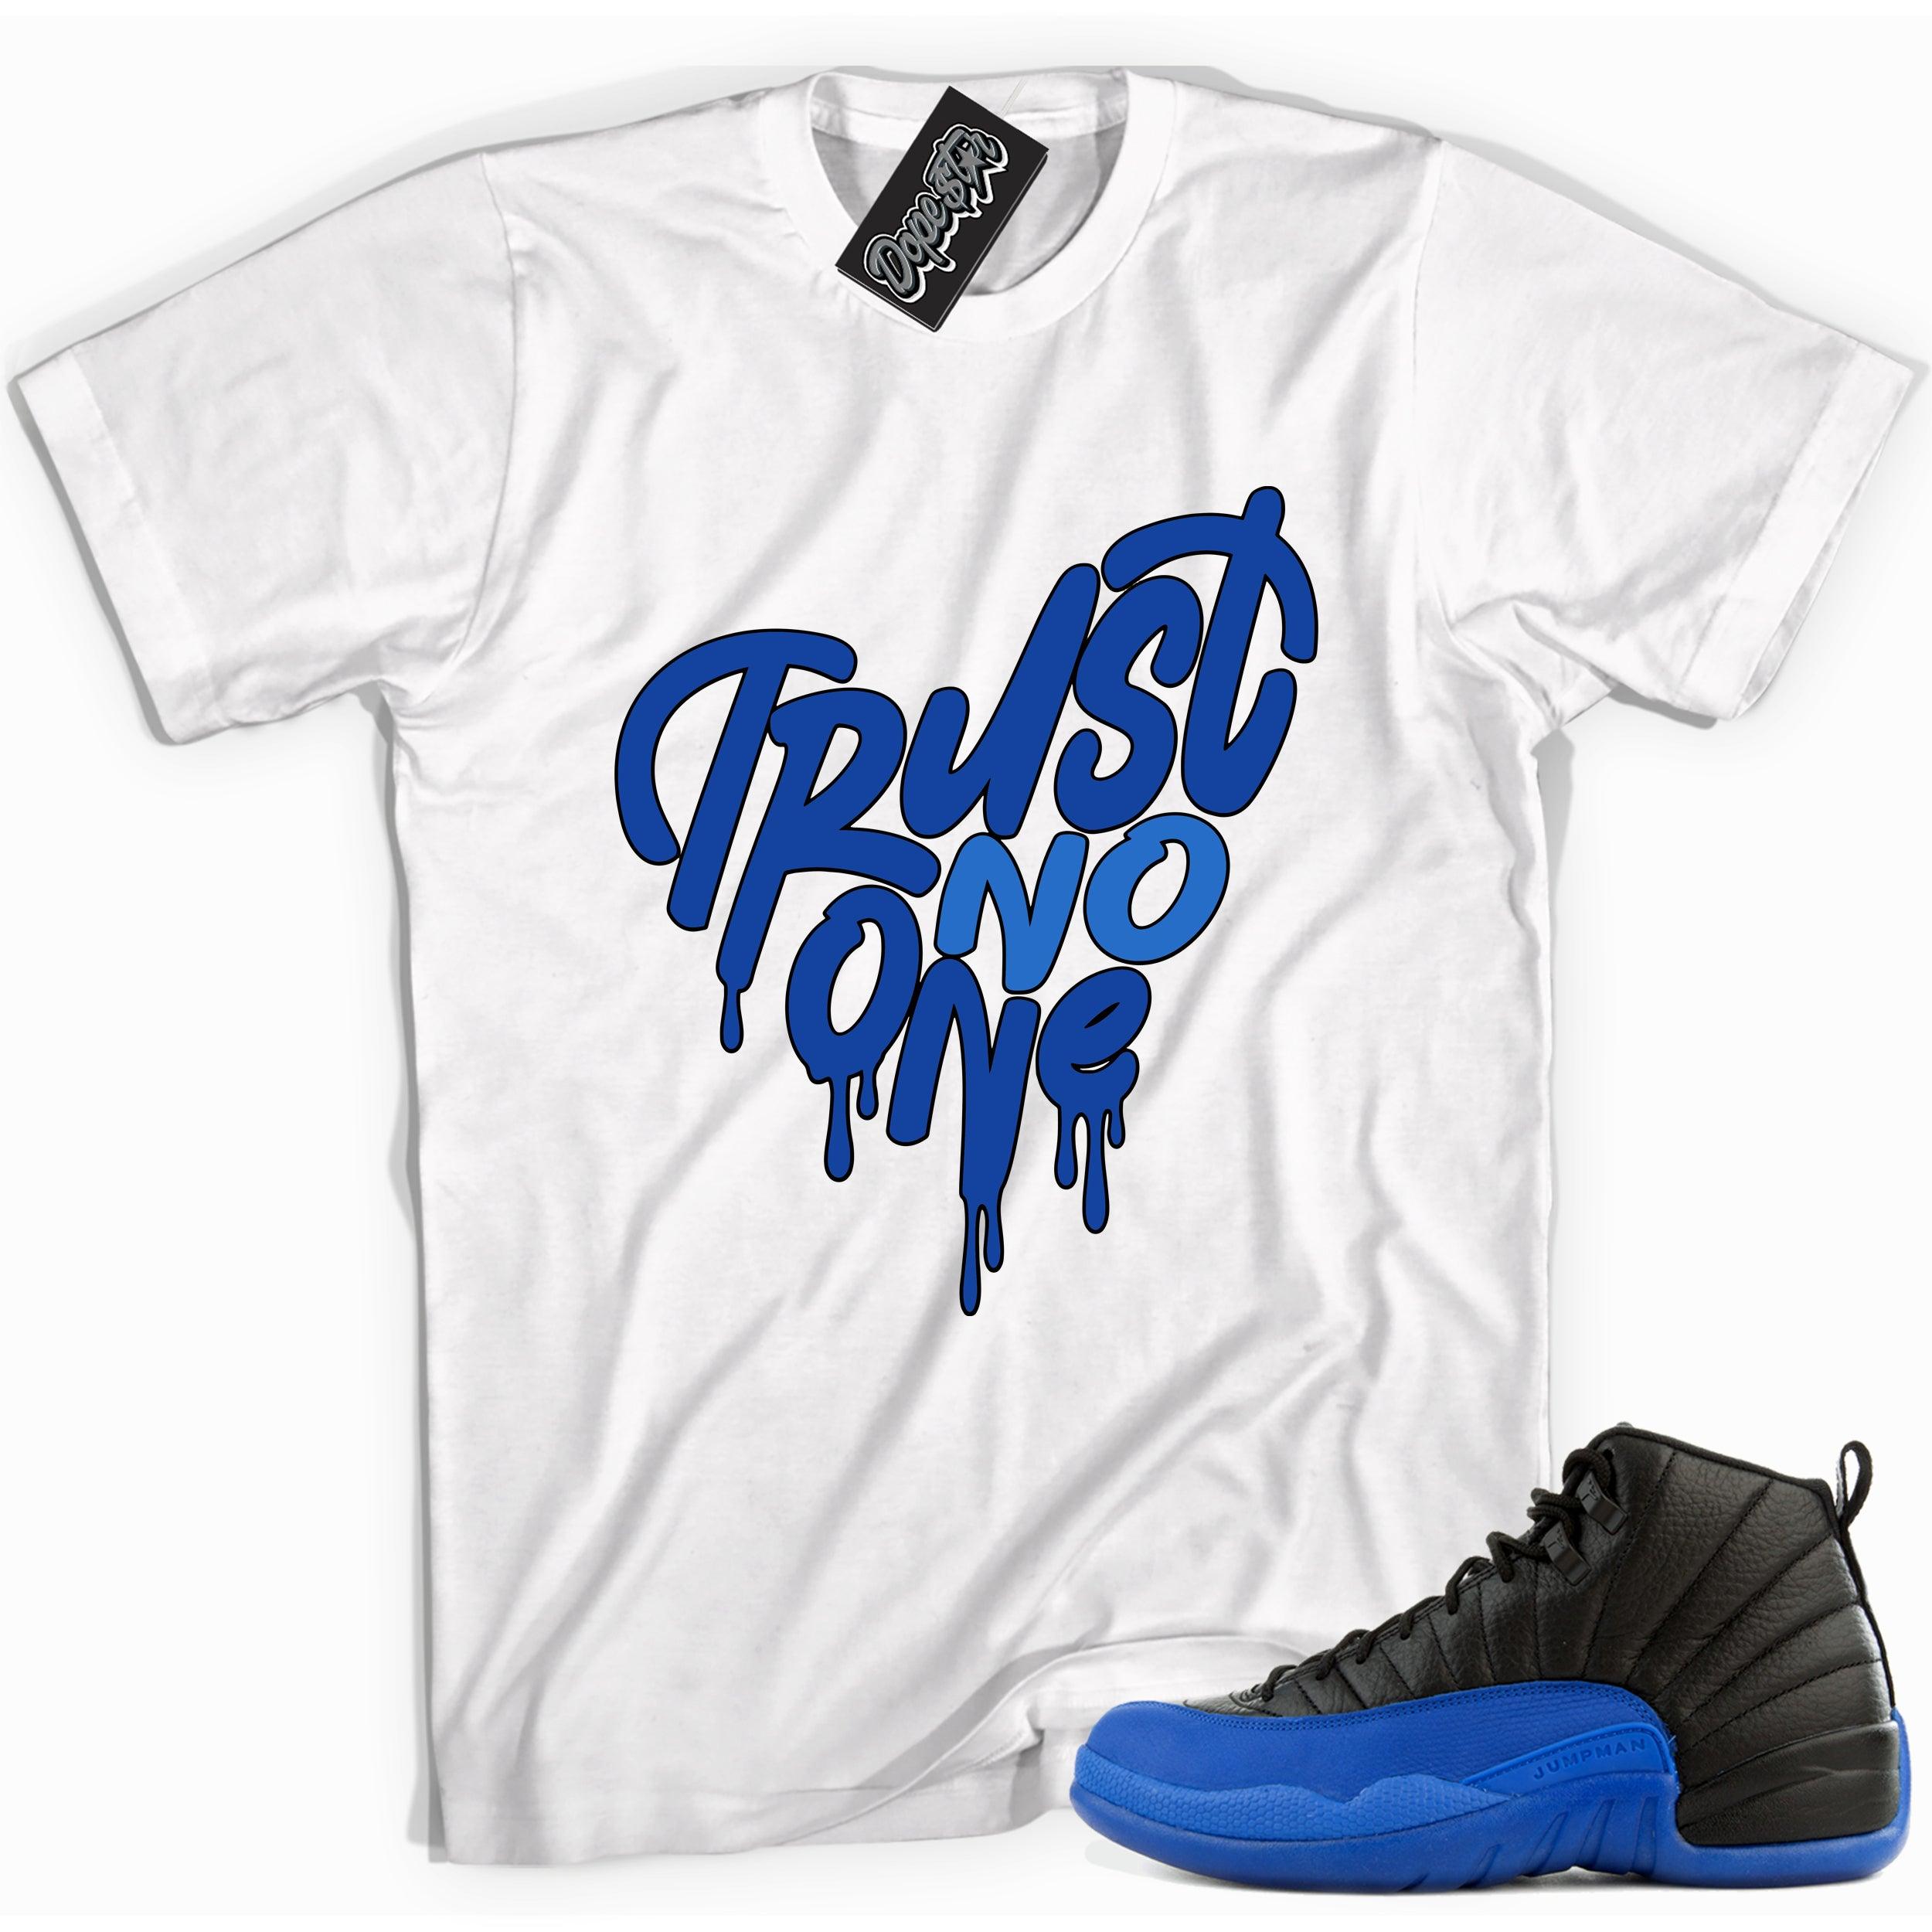 Cool white graphic tee with 'trust no one' print, that perfectly matches Air Jordan 12 Retro Black Game Royal sneakers.